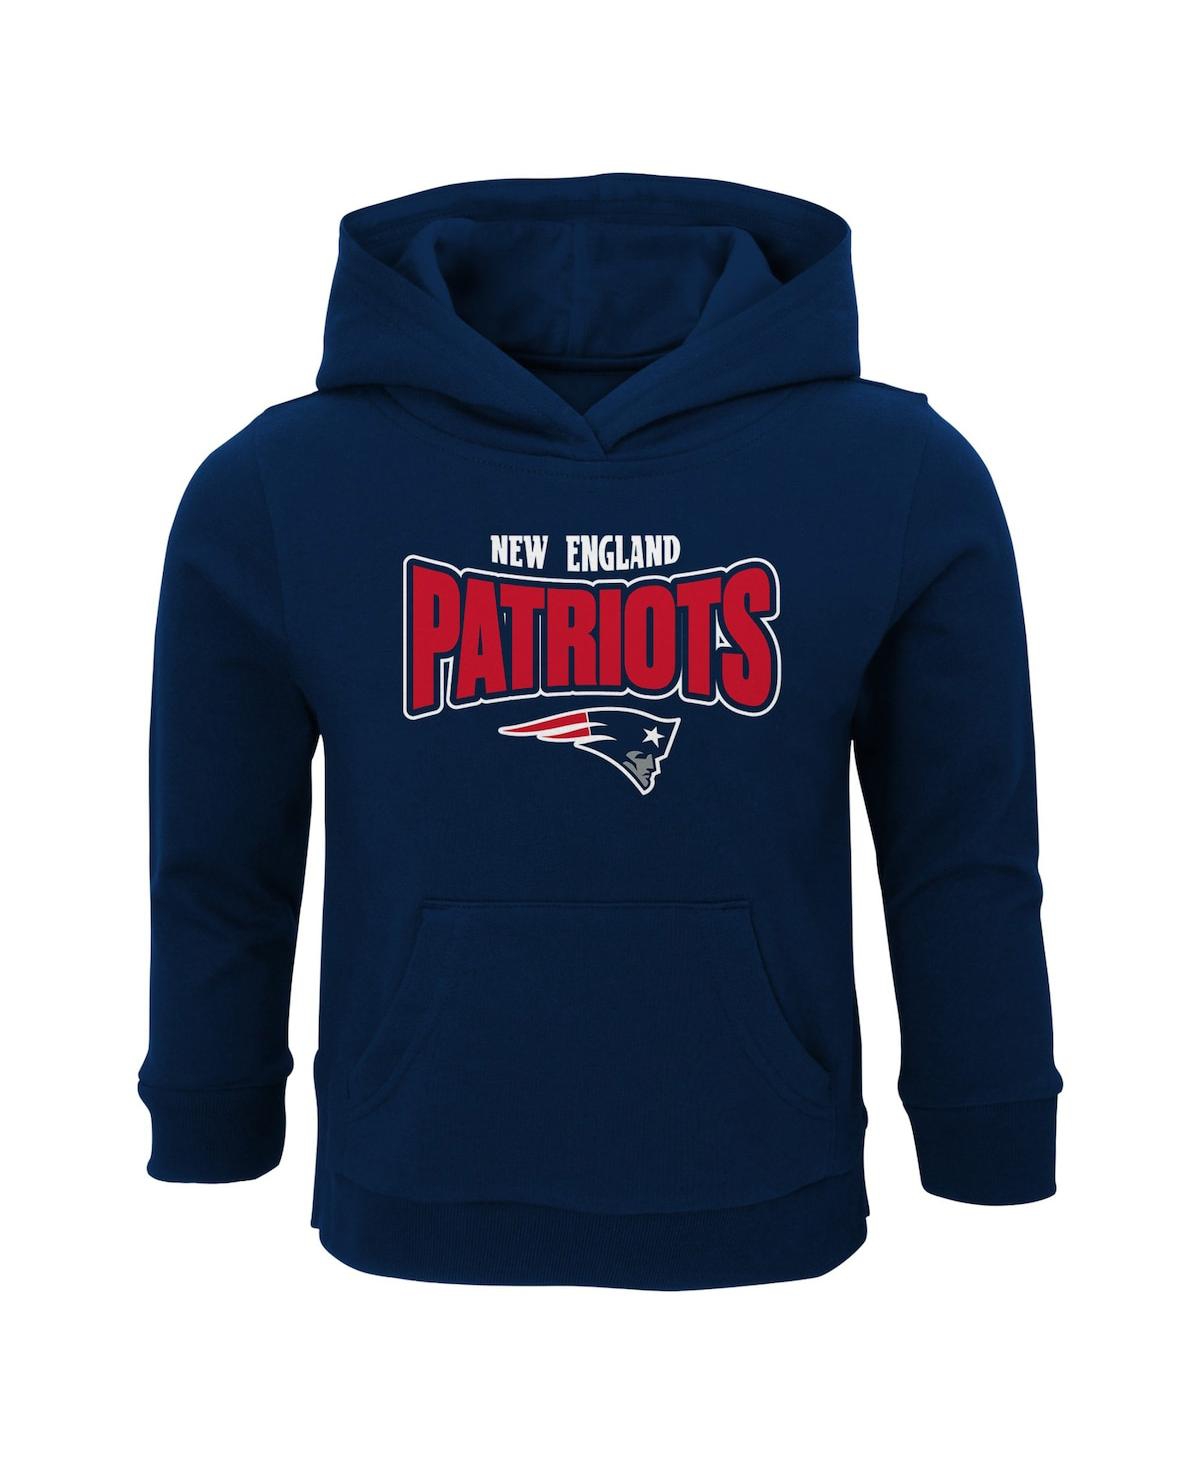 OUTERSTUFF TODDLER BOYS AND GIRLS NAVY NEW ENGLAND PATRIOTS DRAFT PICK PULLOVER HOODIE